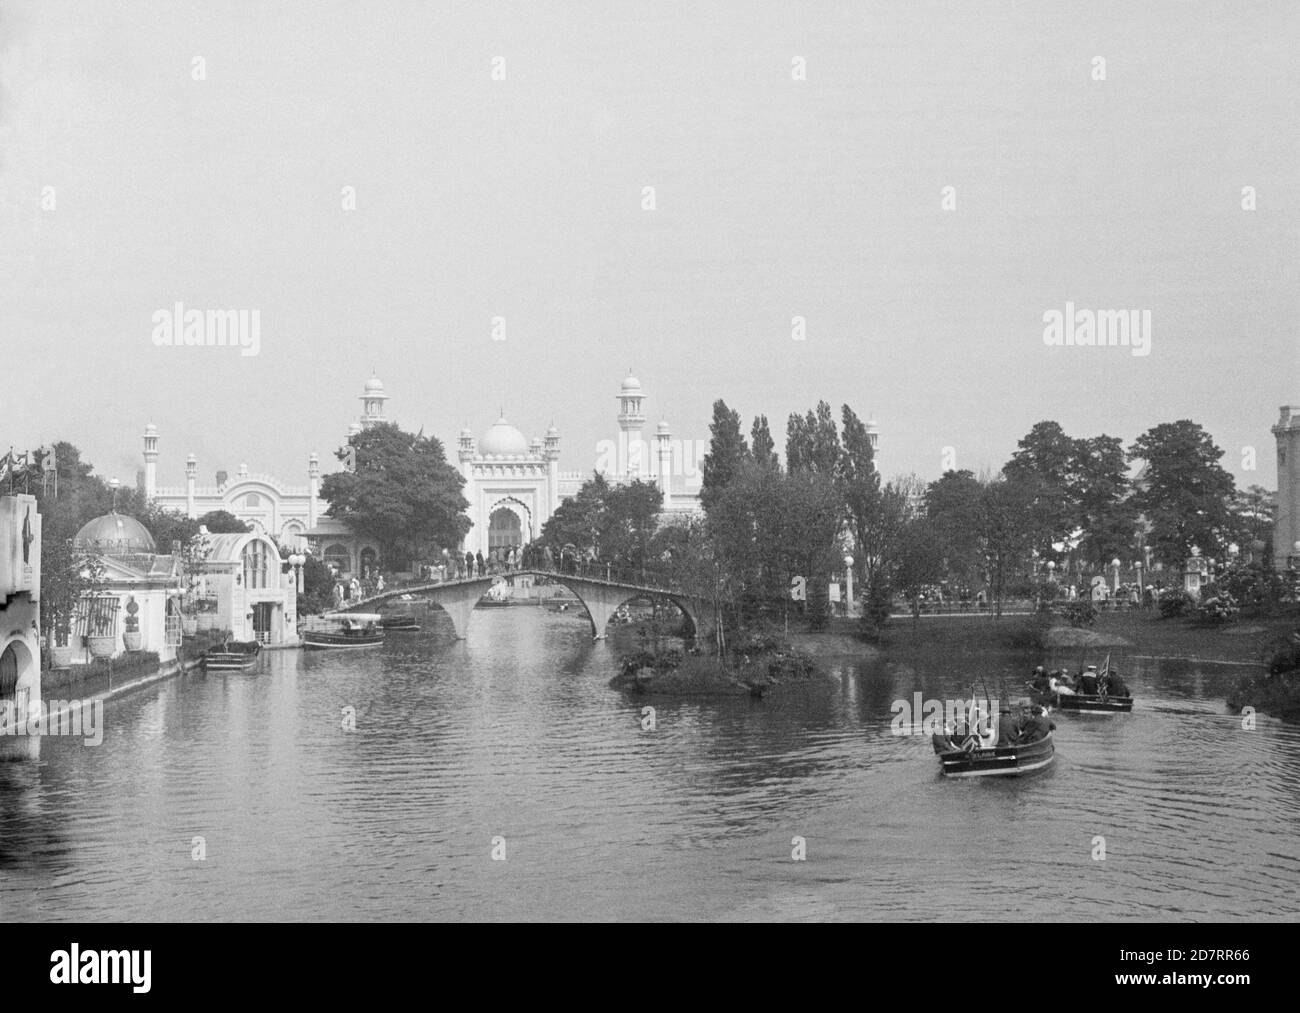 An old photograph, c.1924, of The British Empire Exhibition held at Wembley Park, Wembley, England, UK from 23.04.1924 to 31.10.1925. This view looks down the boating lake towards the Indian Pavilion. The main building material used for the buildings was reinforced concrete, (‘ferro-concrete’), selected for its speed of construction. Wembley Park earned the title of the first ‘concrete city’. The Indian pavilion had towers and domes in the style of the Taj Mahal. For economic and political reasons, the Indian Government did not take part in the 1925 season. Stock Photo